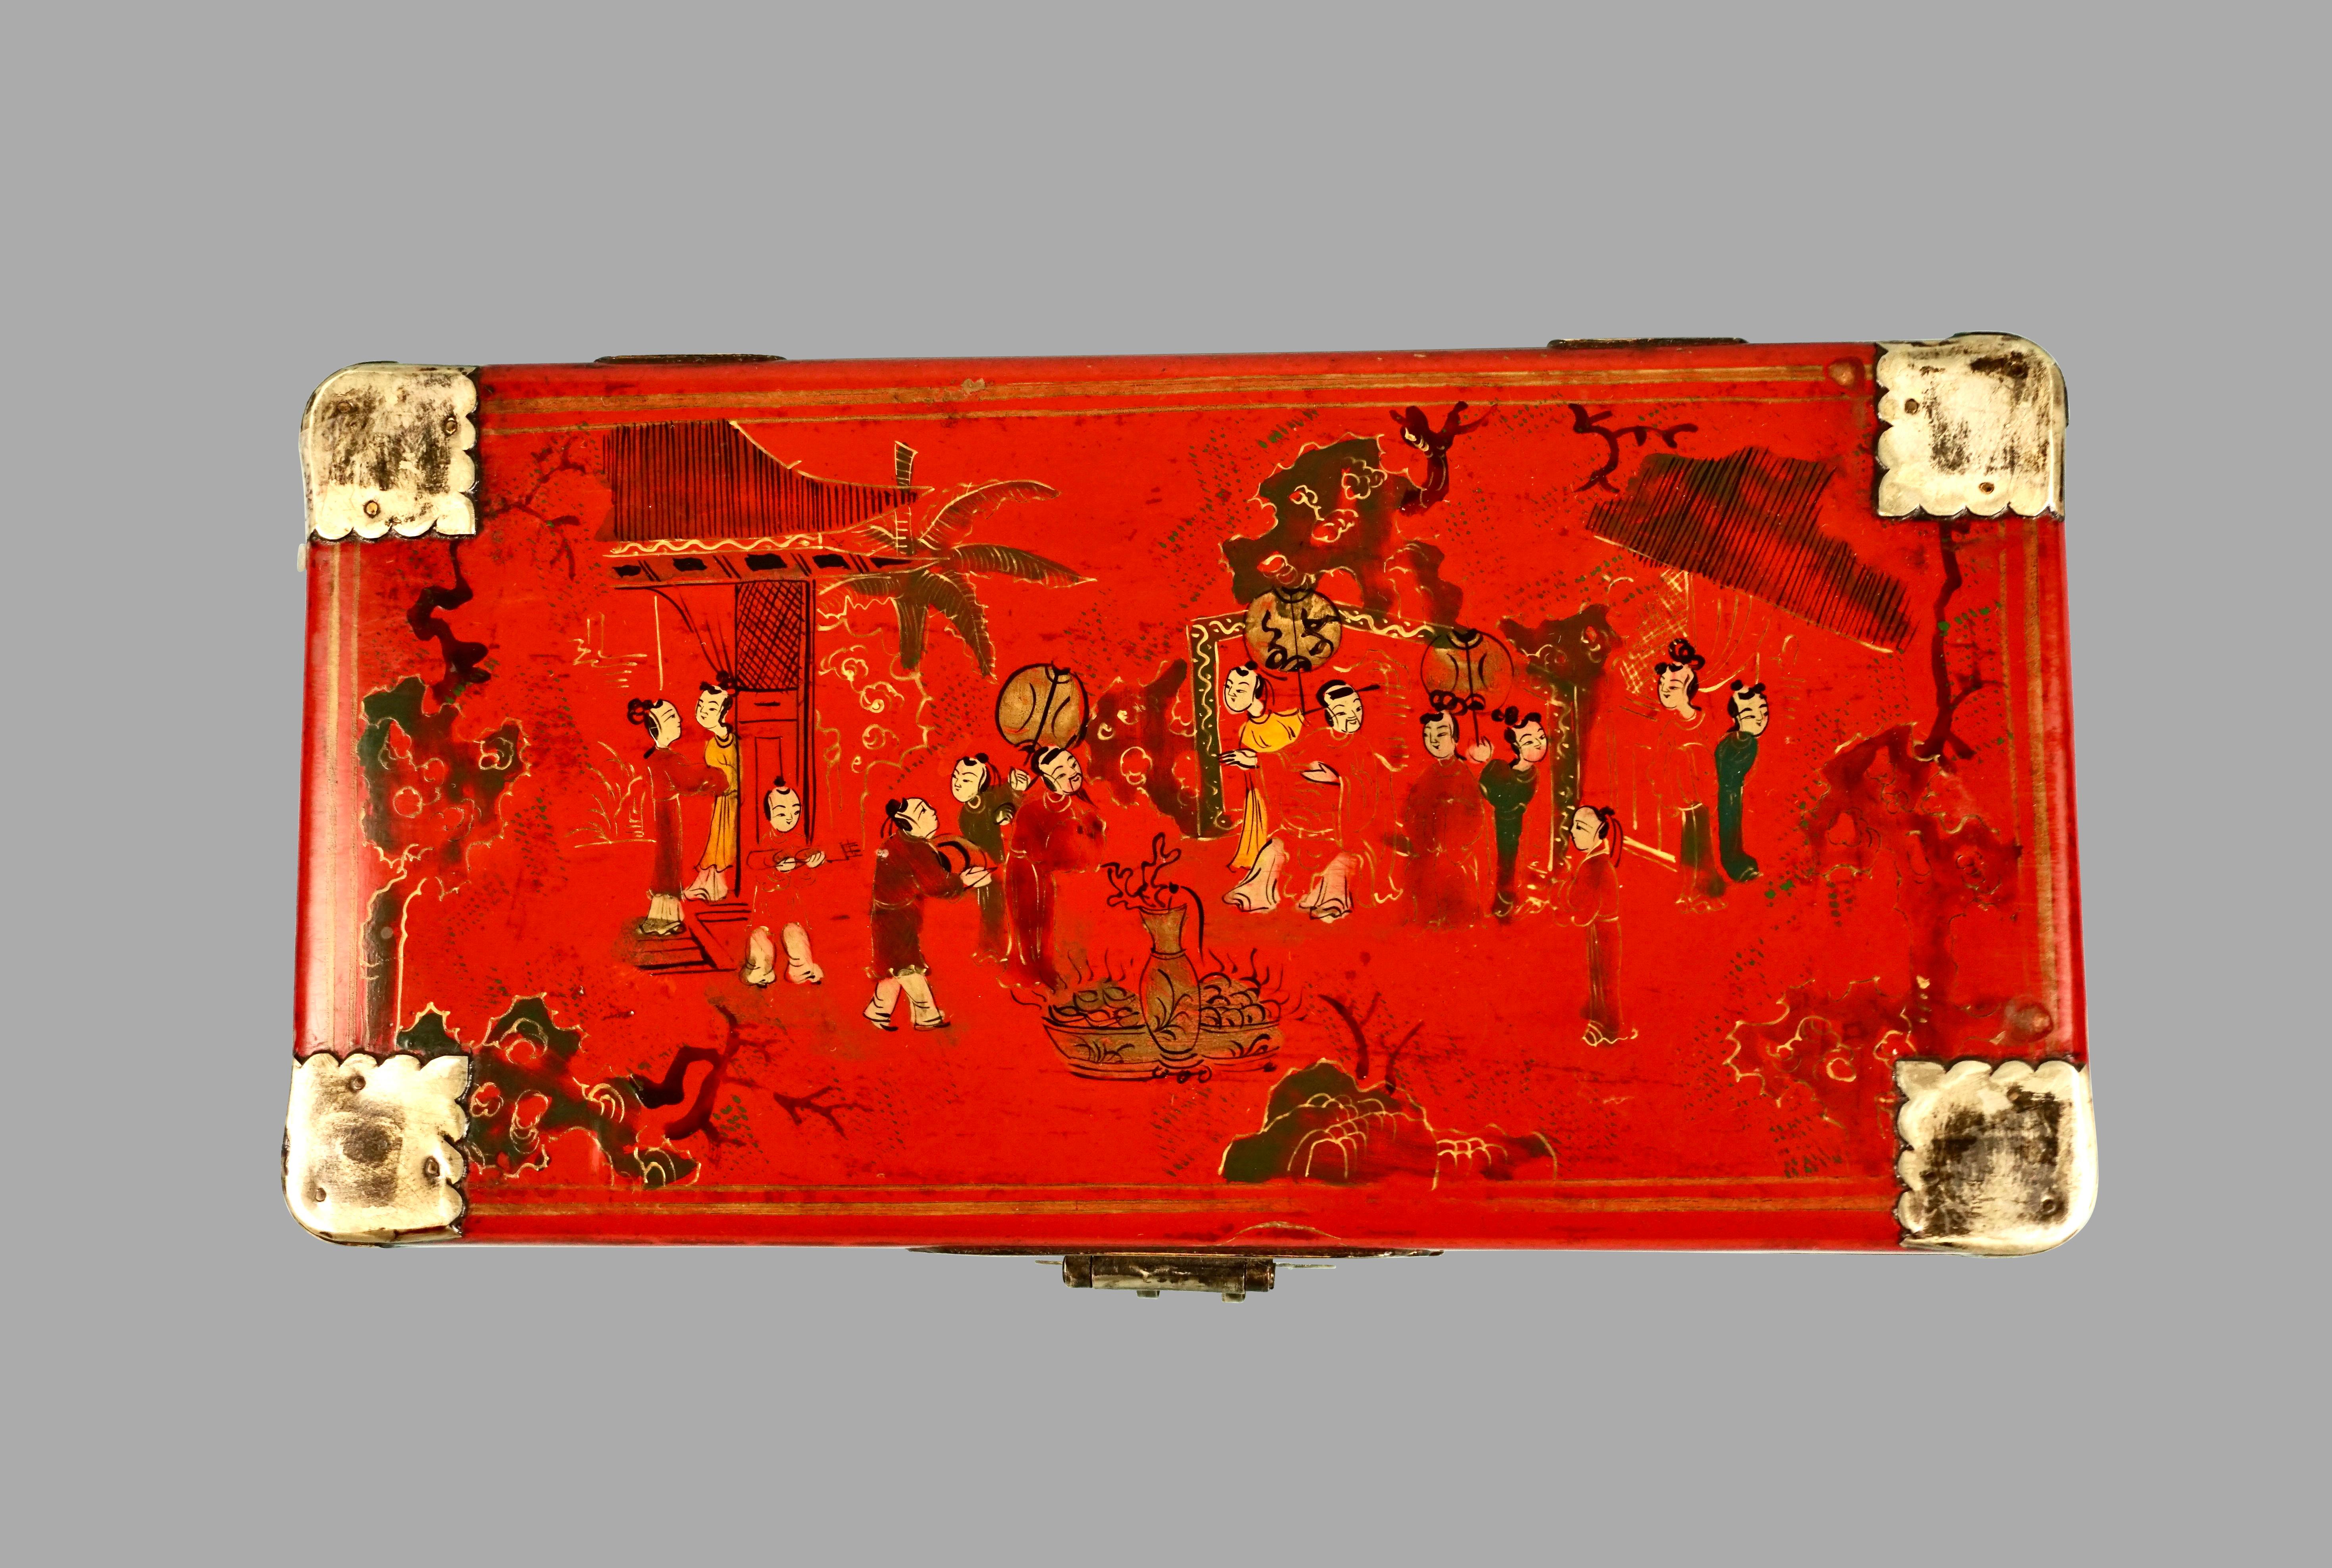 A Chinese red lacquer rectangular box with white metal mounted corners elaborately decorated overall with figures of men and women in an exotic setting.
Excellent quality in very good condition. Circa 1900-1930.